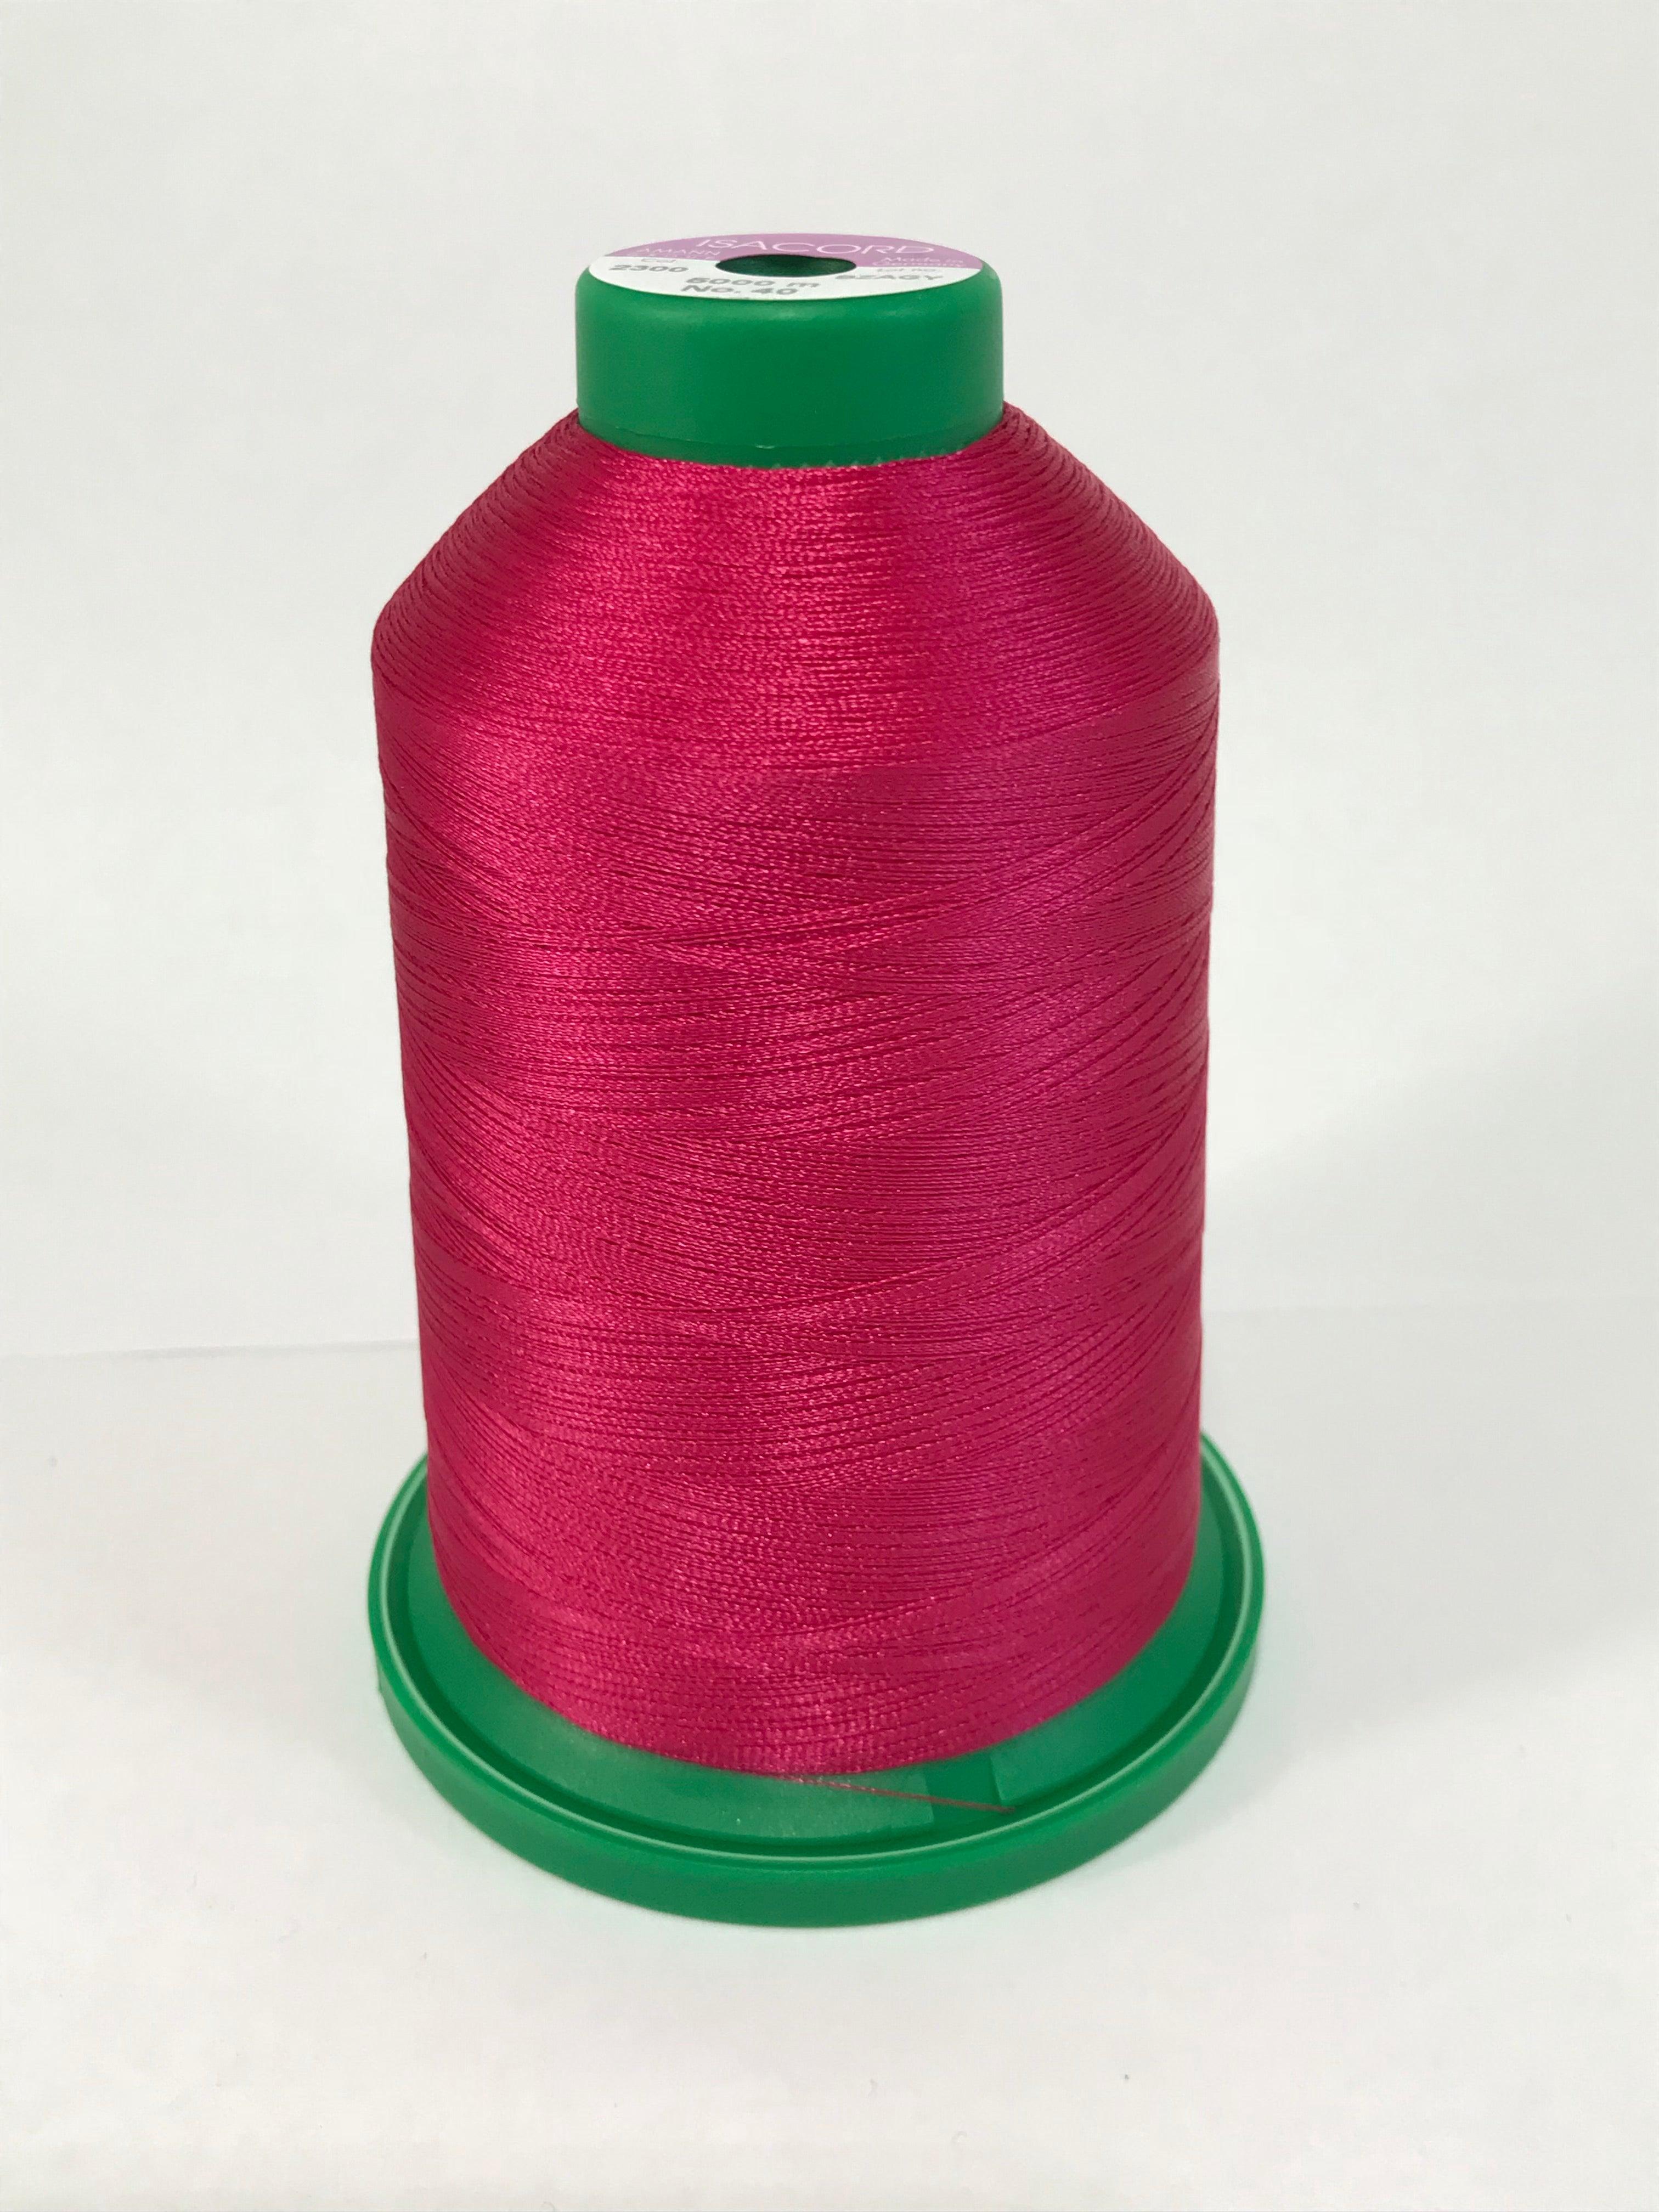 2300 - BRIGHT RUBY - ISACORD EMBROIDERY THREAD 40 WT